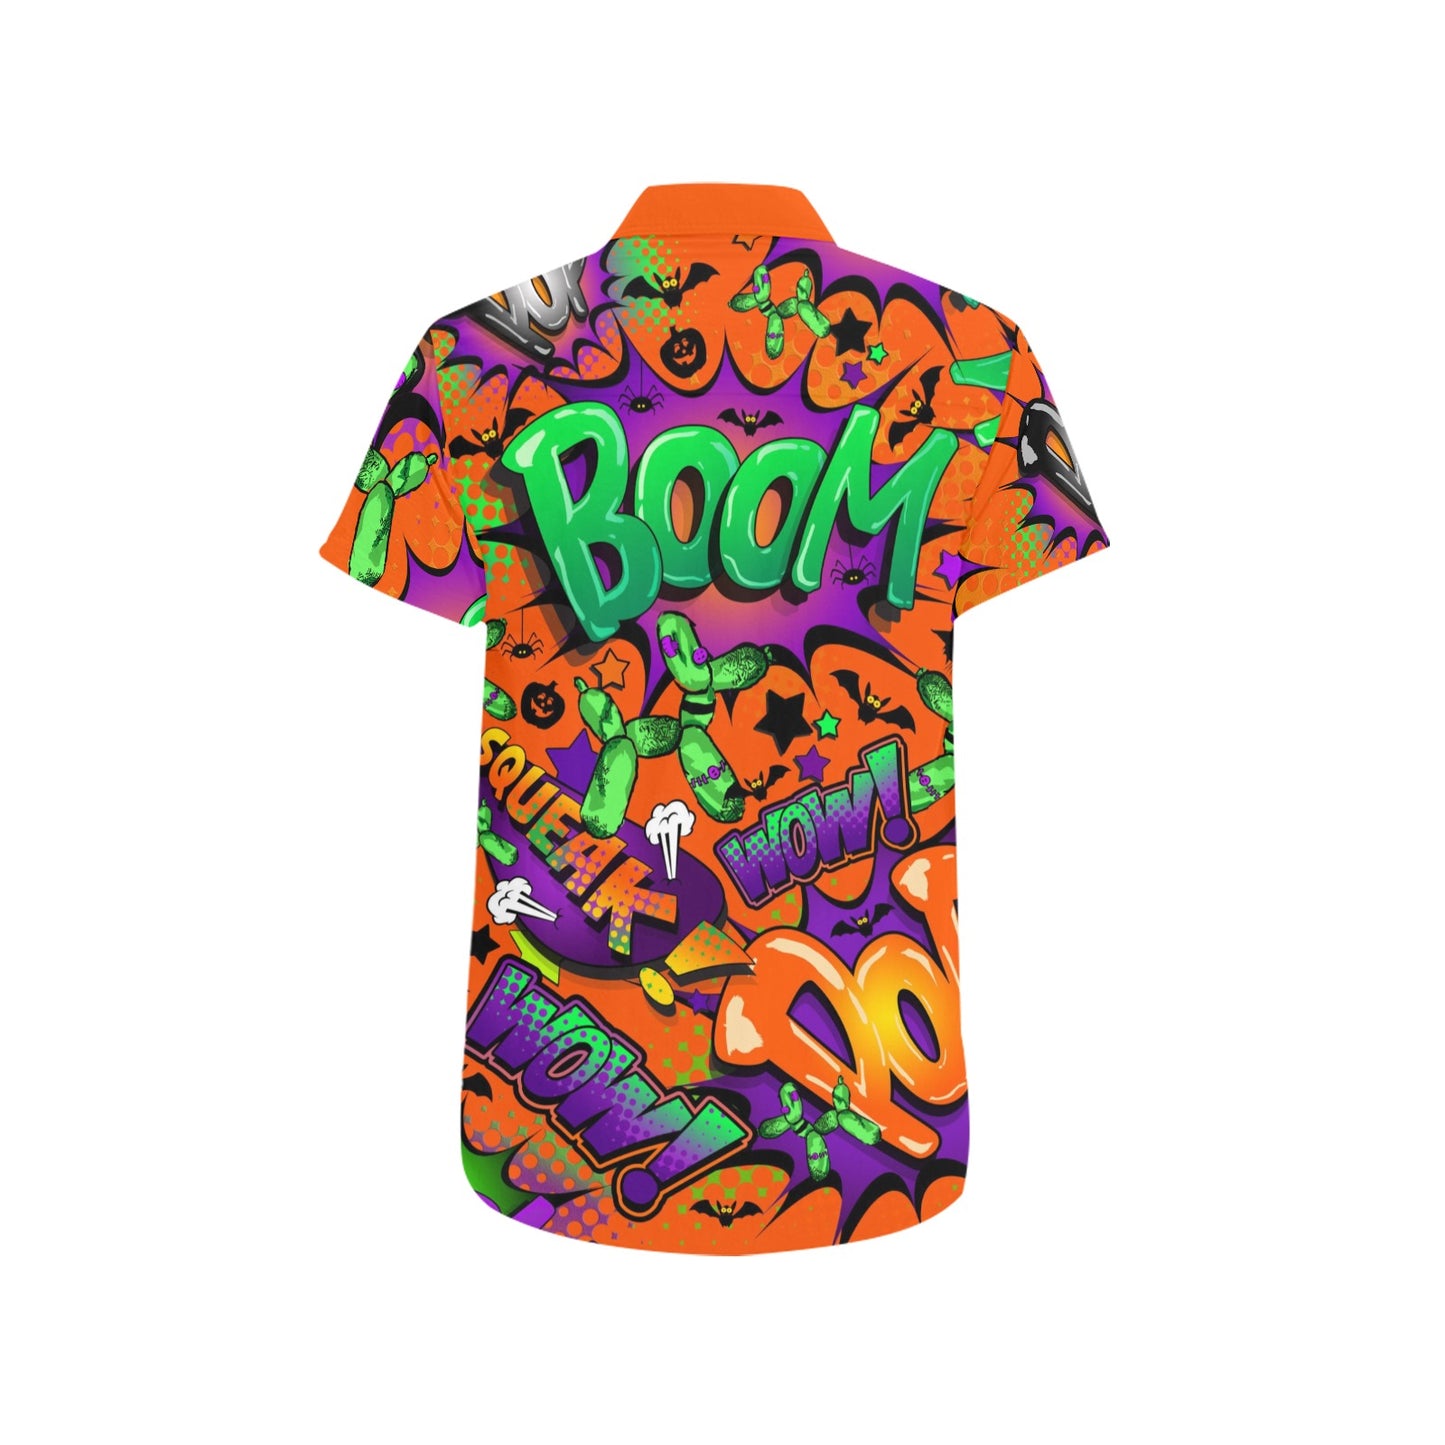 Fun Halloween Shirt in orange purple and black for balloon twisters and entertainers